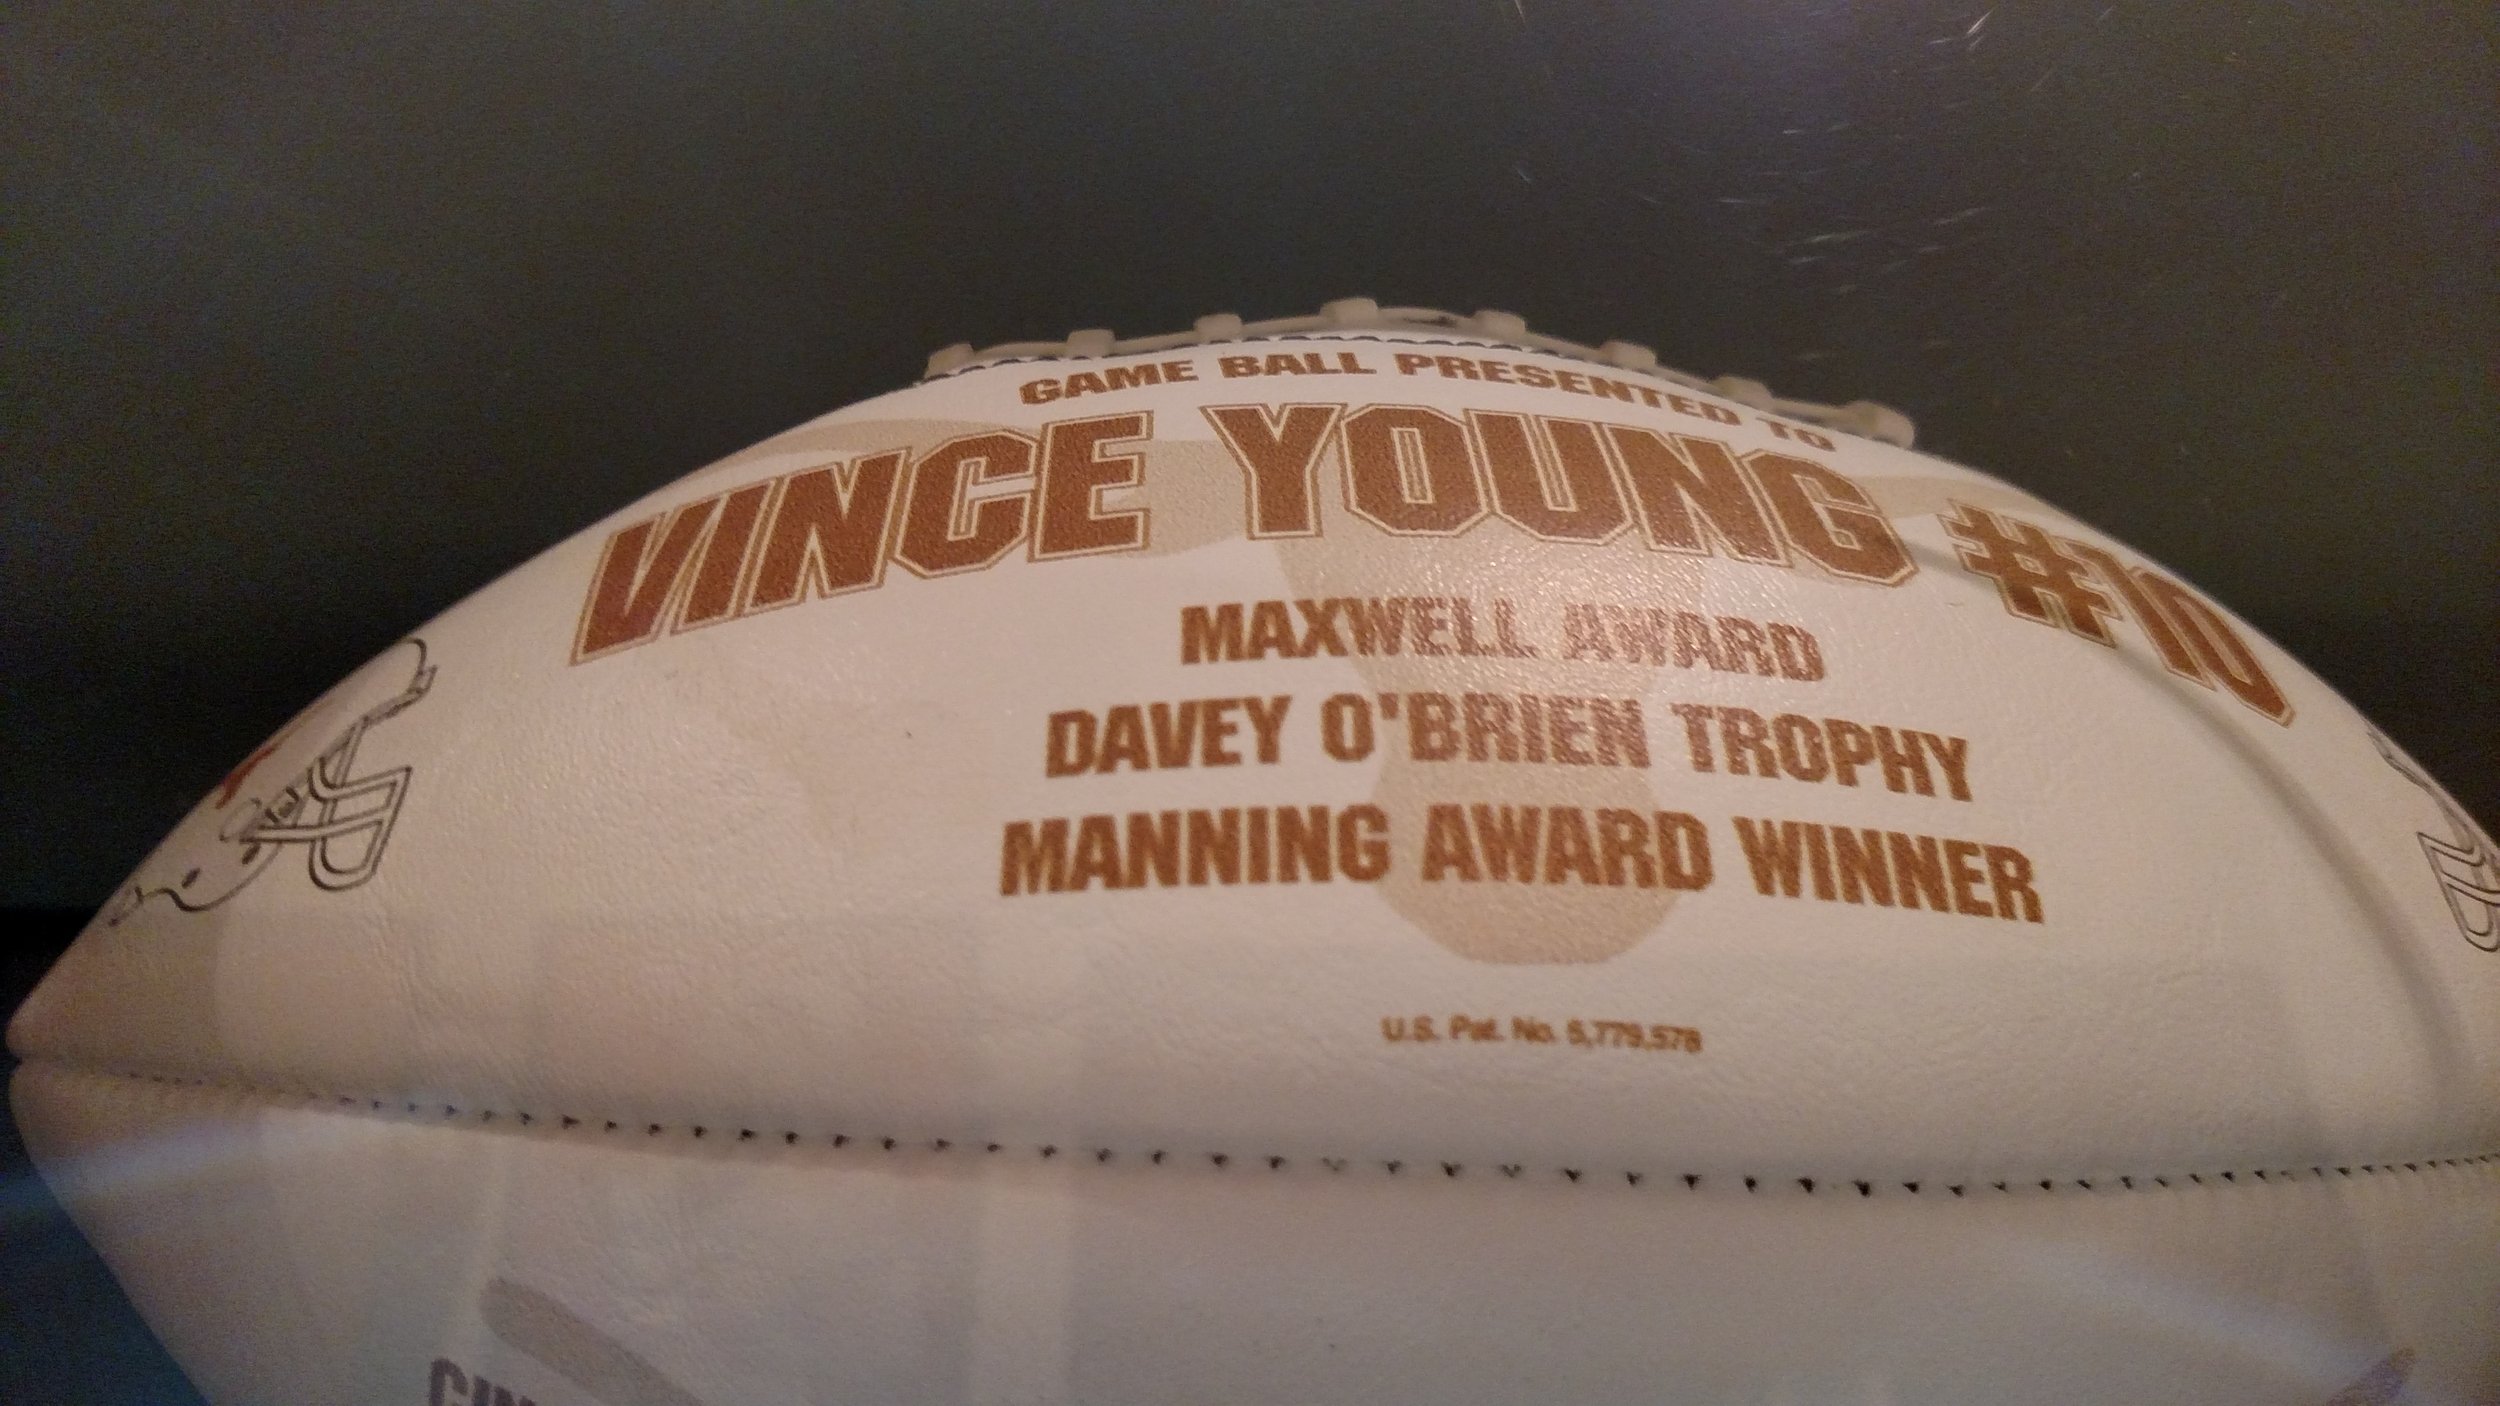  Vince Young 